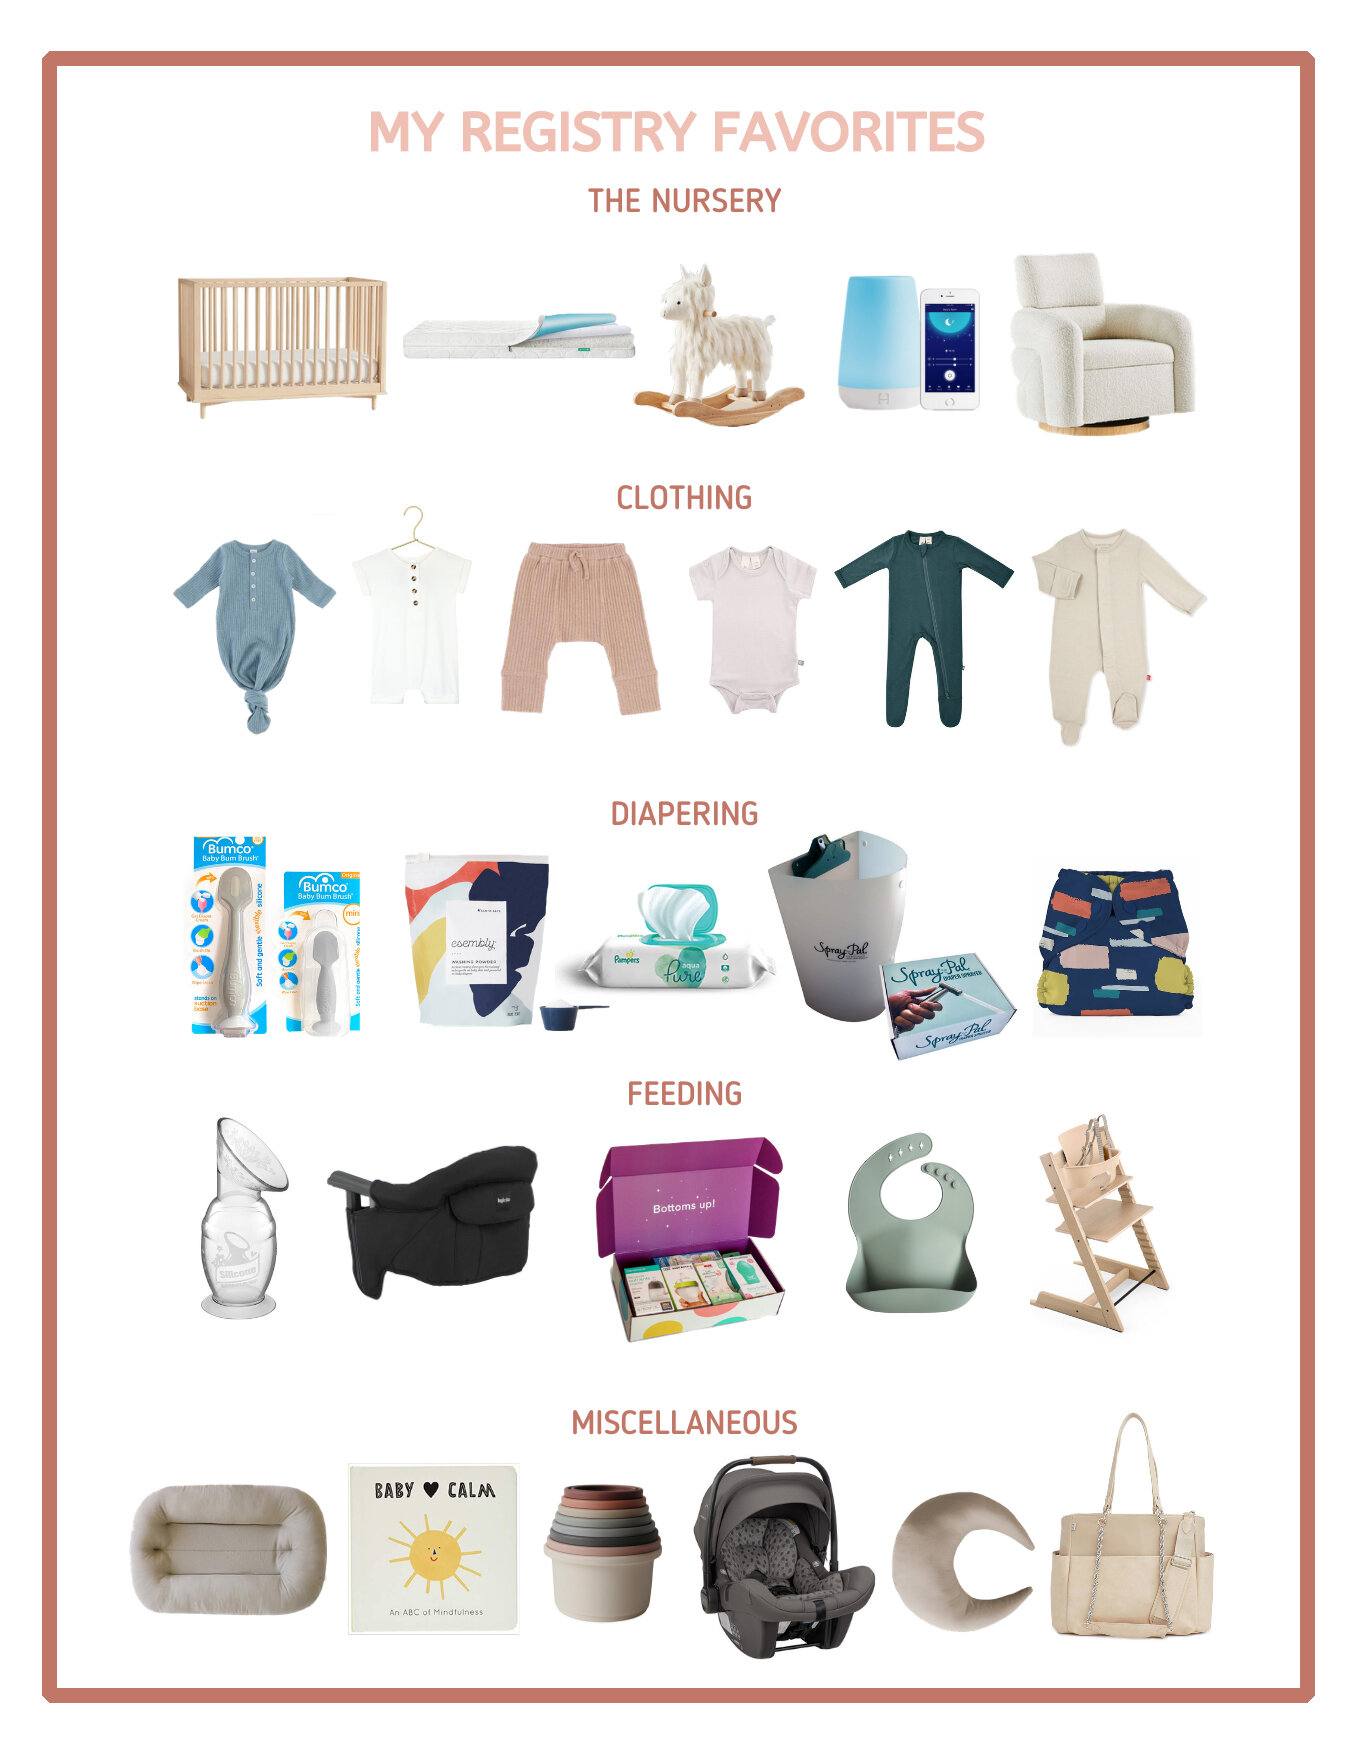 Baby Essentials and Favorites 